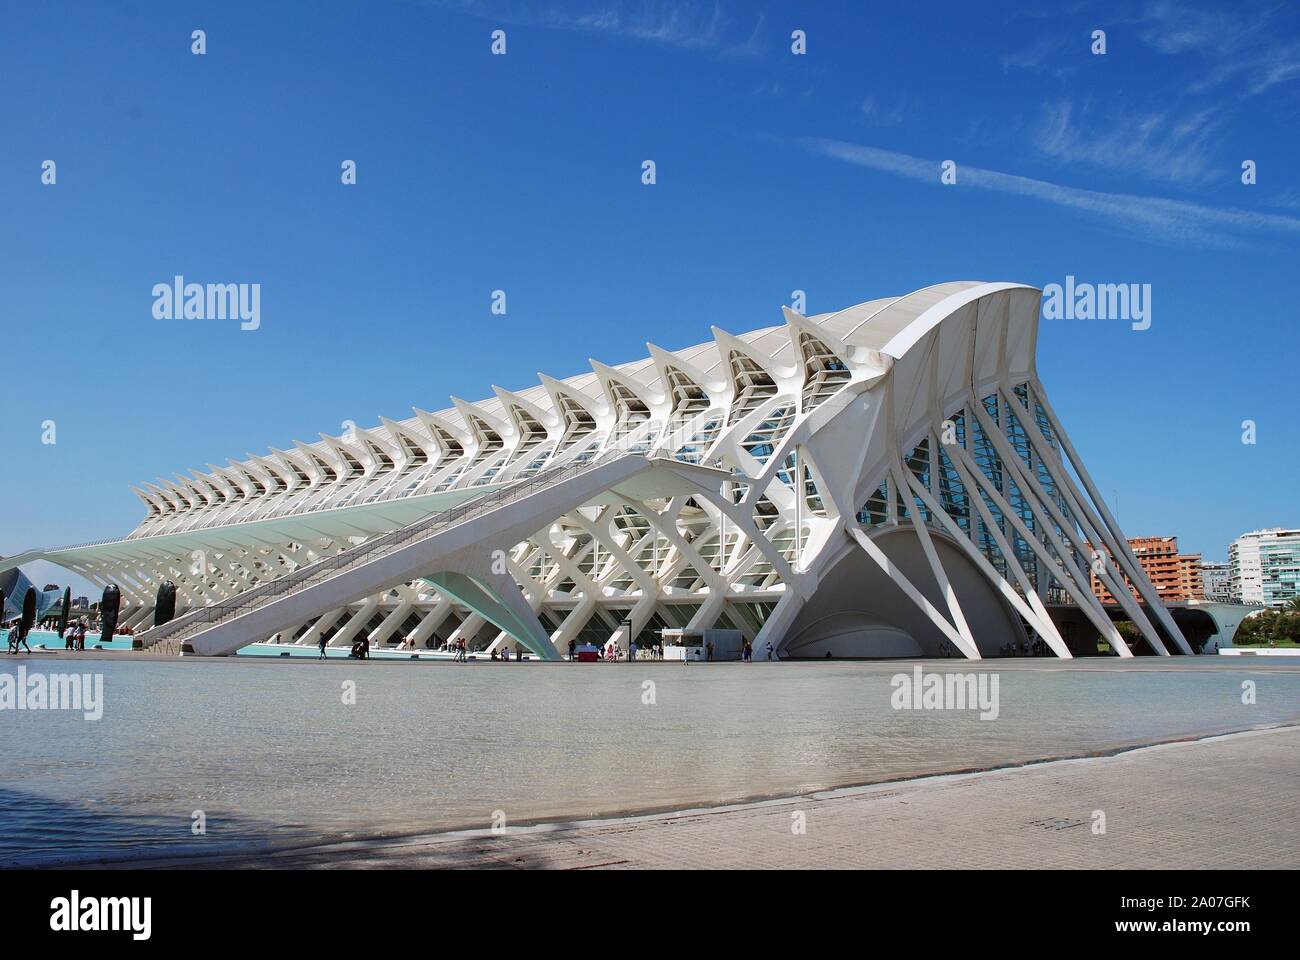 The Museu de les Ciencies at the City of Arts and Sciences in Valencia, Spain on September 5, 2019. Stock Photo